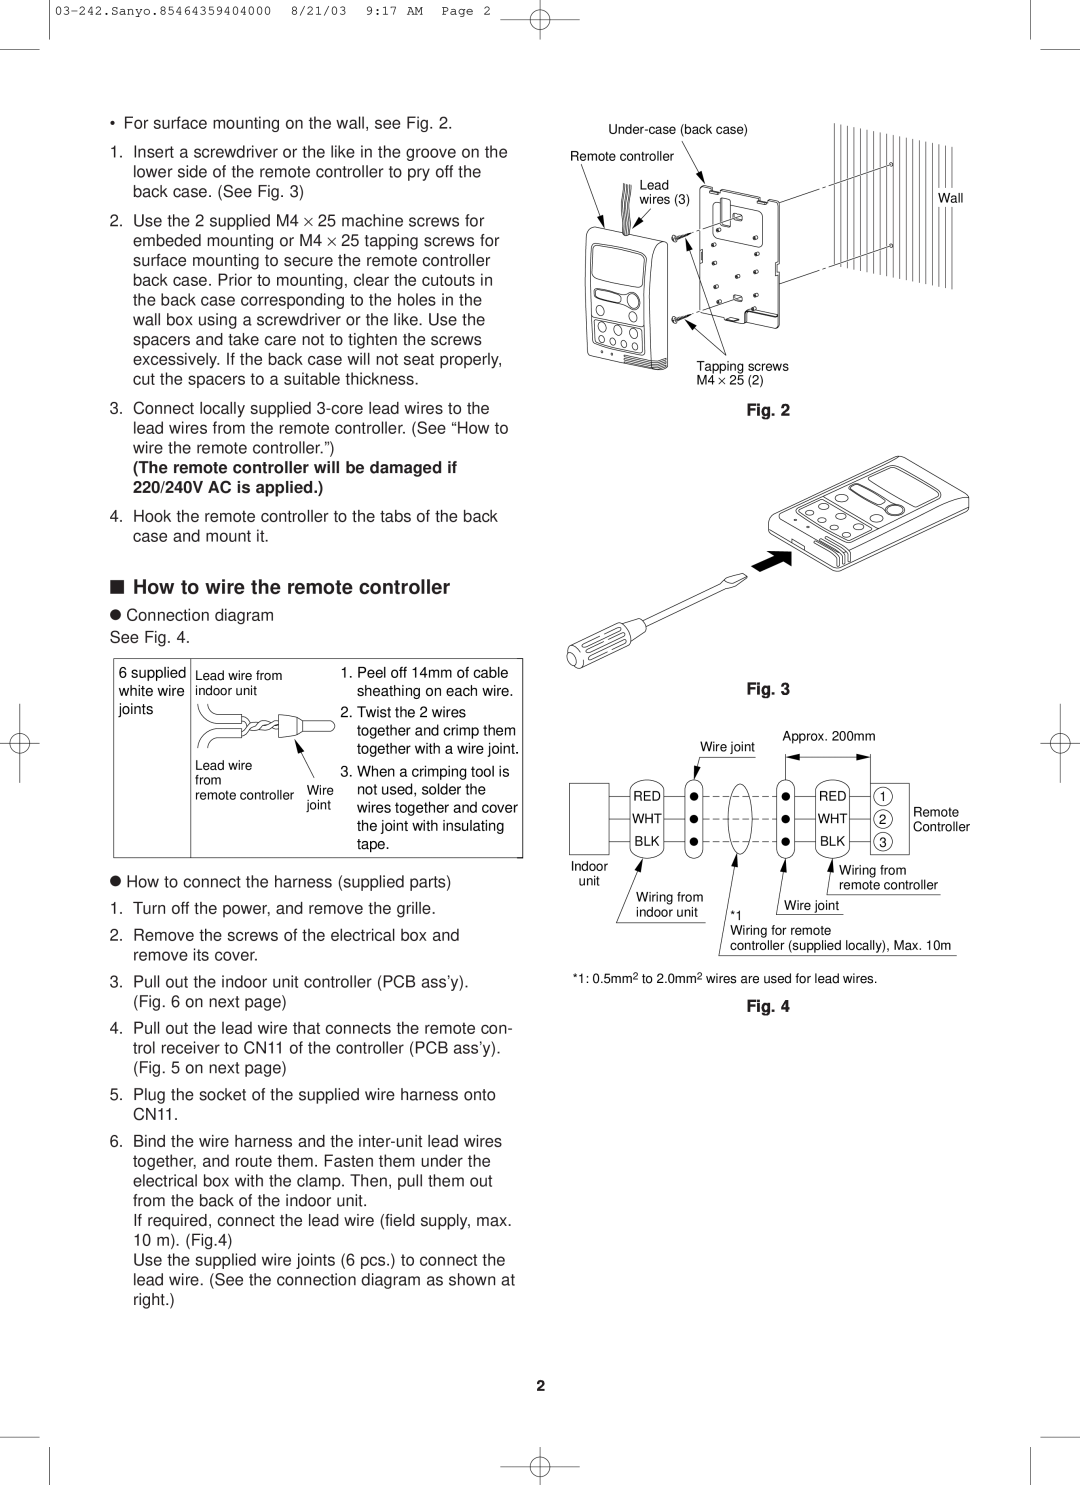 Sanyo RCS-KS2432AWD How to wire the remote controller, The remote controller will be damaged if 220/240V AC is applied 